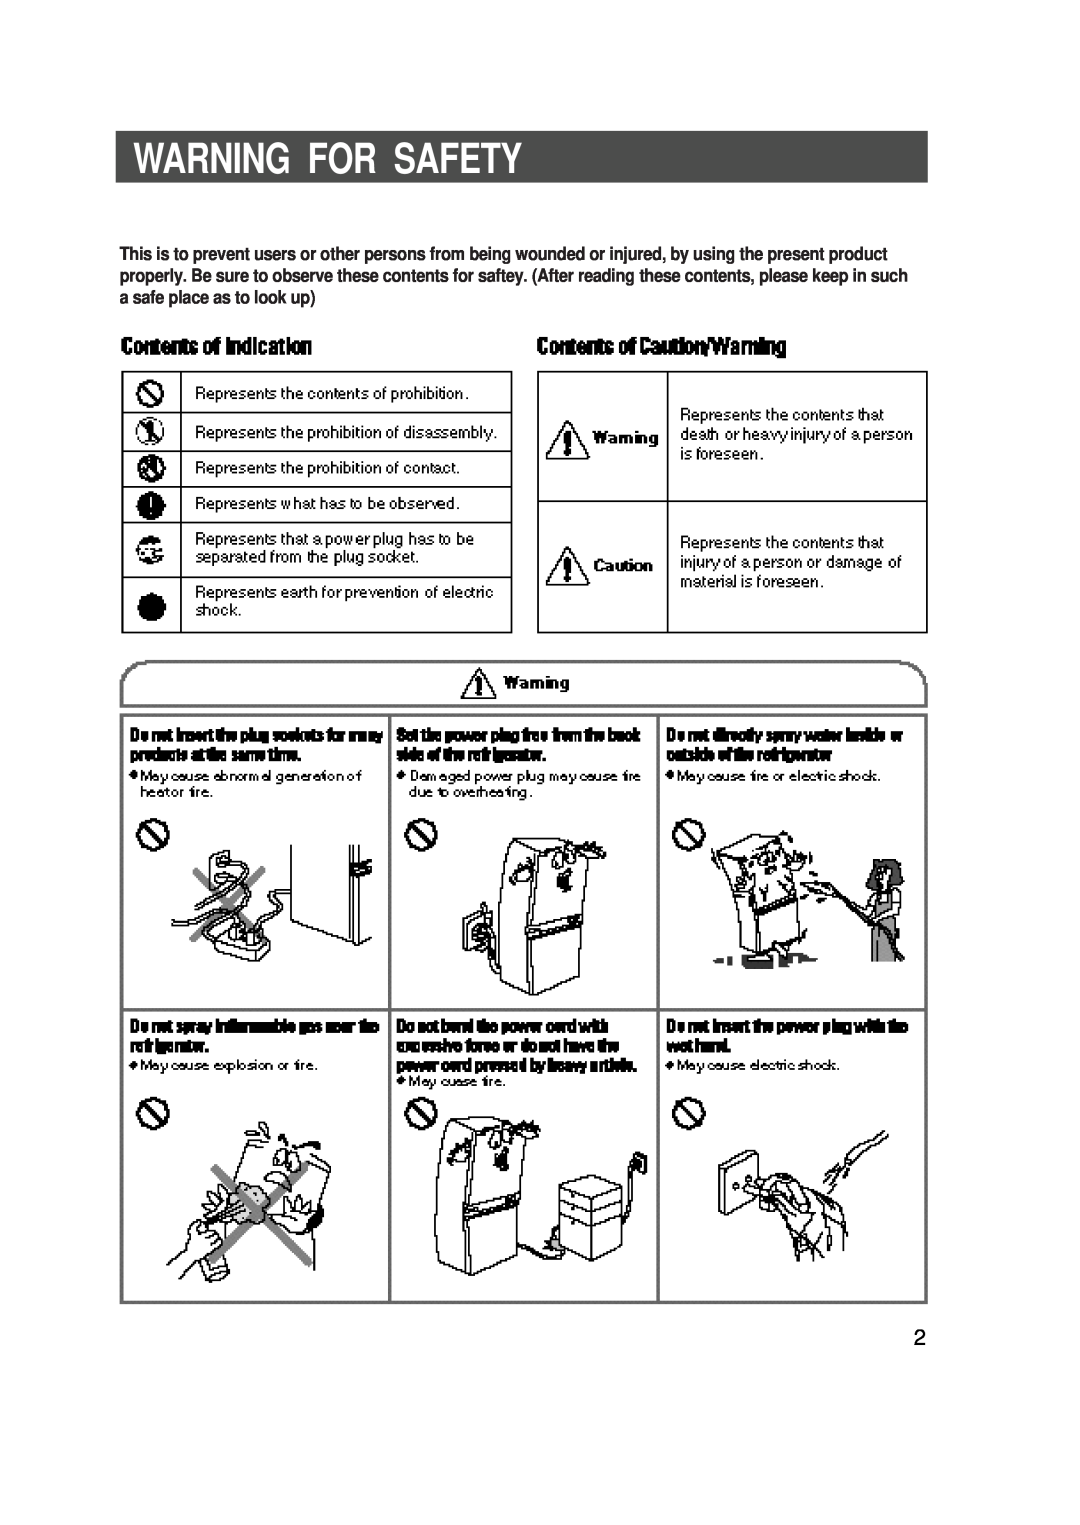 Samsung SR-L676EV, SR-L626EV, SR-L628EV, SR-L678EV manual Warning For Safety 